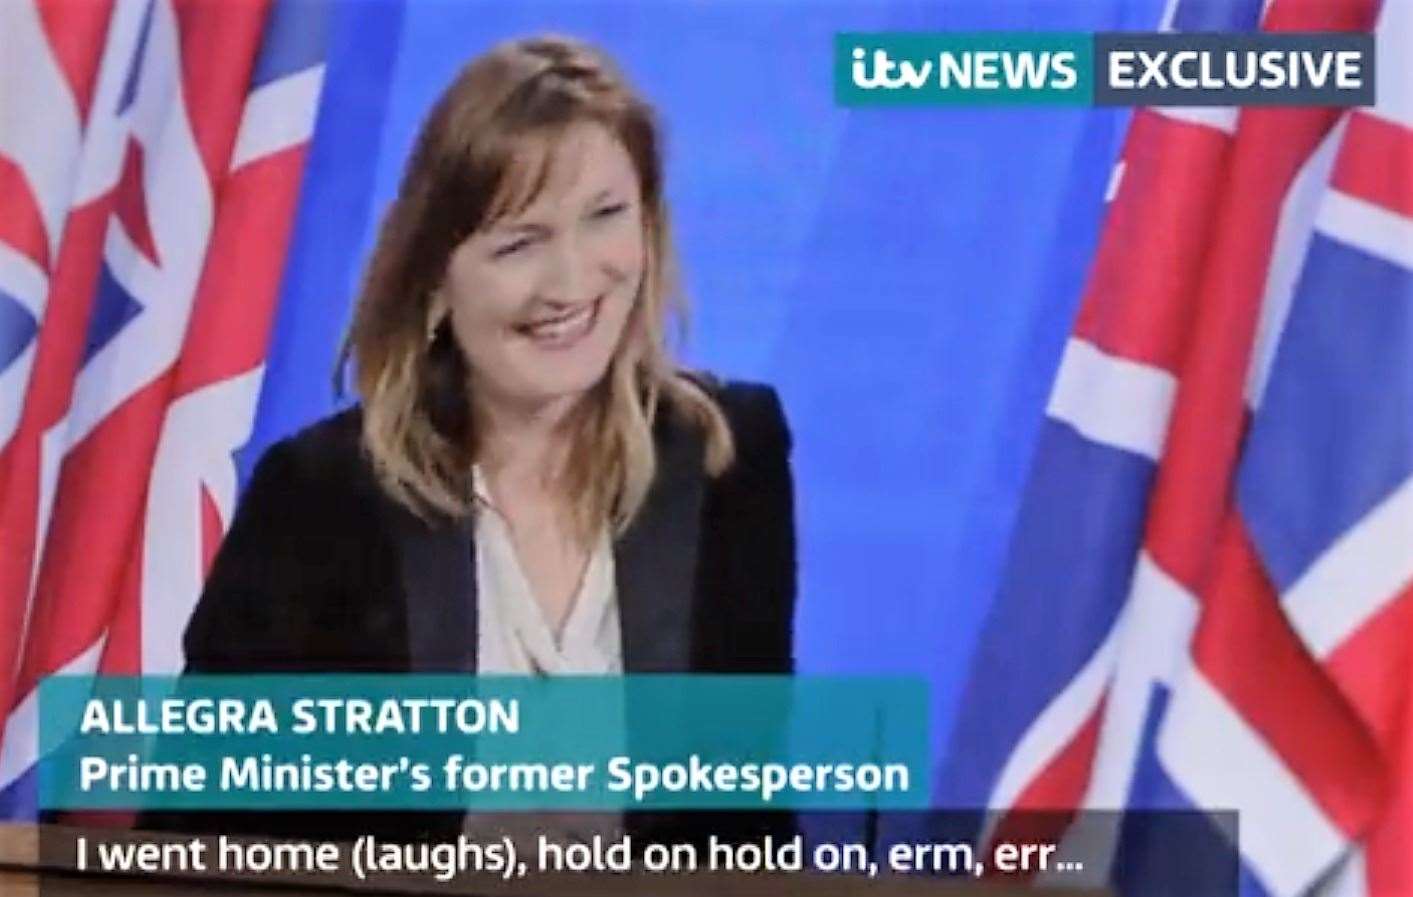 Allegra Stratton, the PM's former spokesperson, taking part in a press conference rehearsal in December 2020 in which she is asked about rumours of a Downing Street Christmas party. The footage was leaked to ITV News